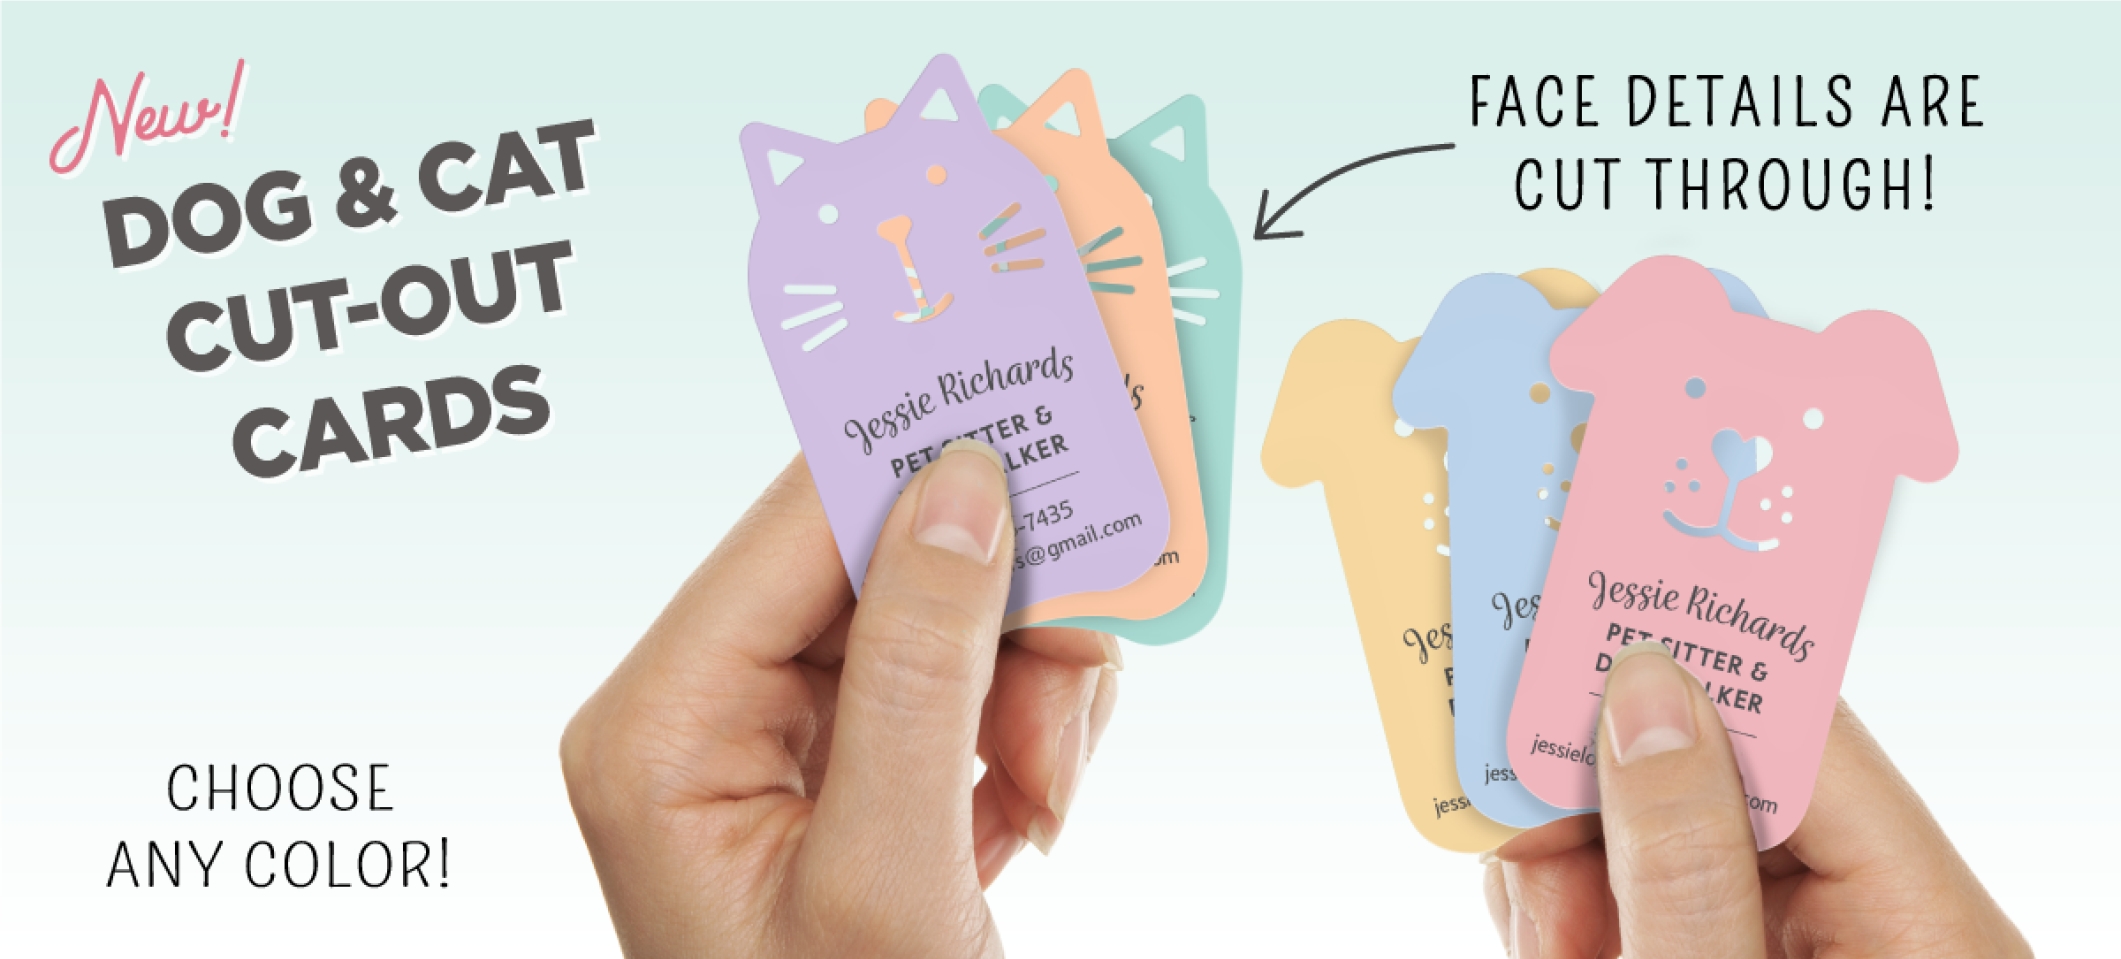 Dog and Cat Cut-Out Cards